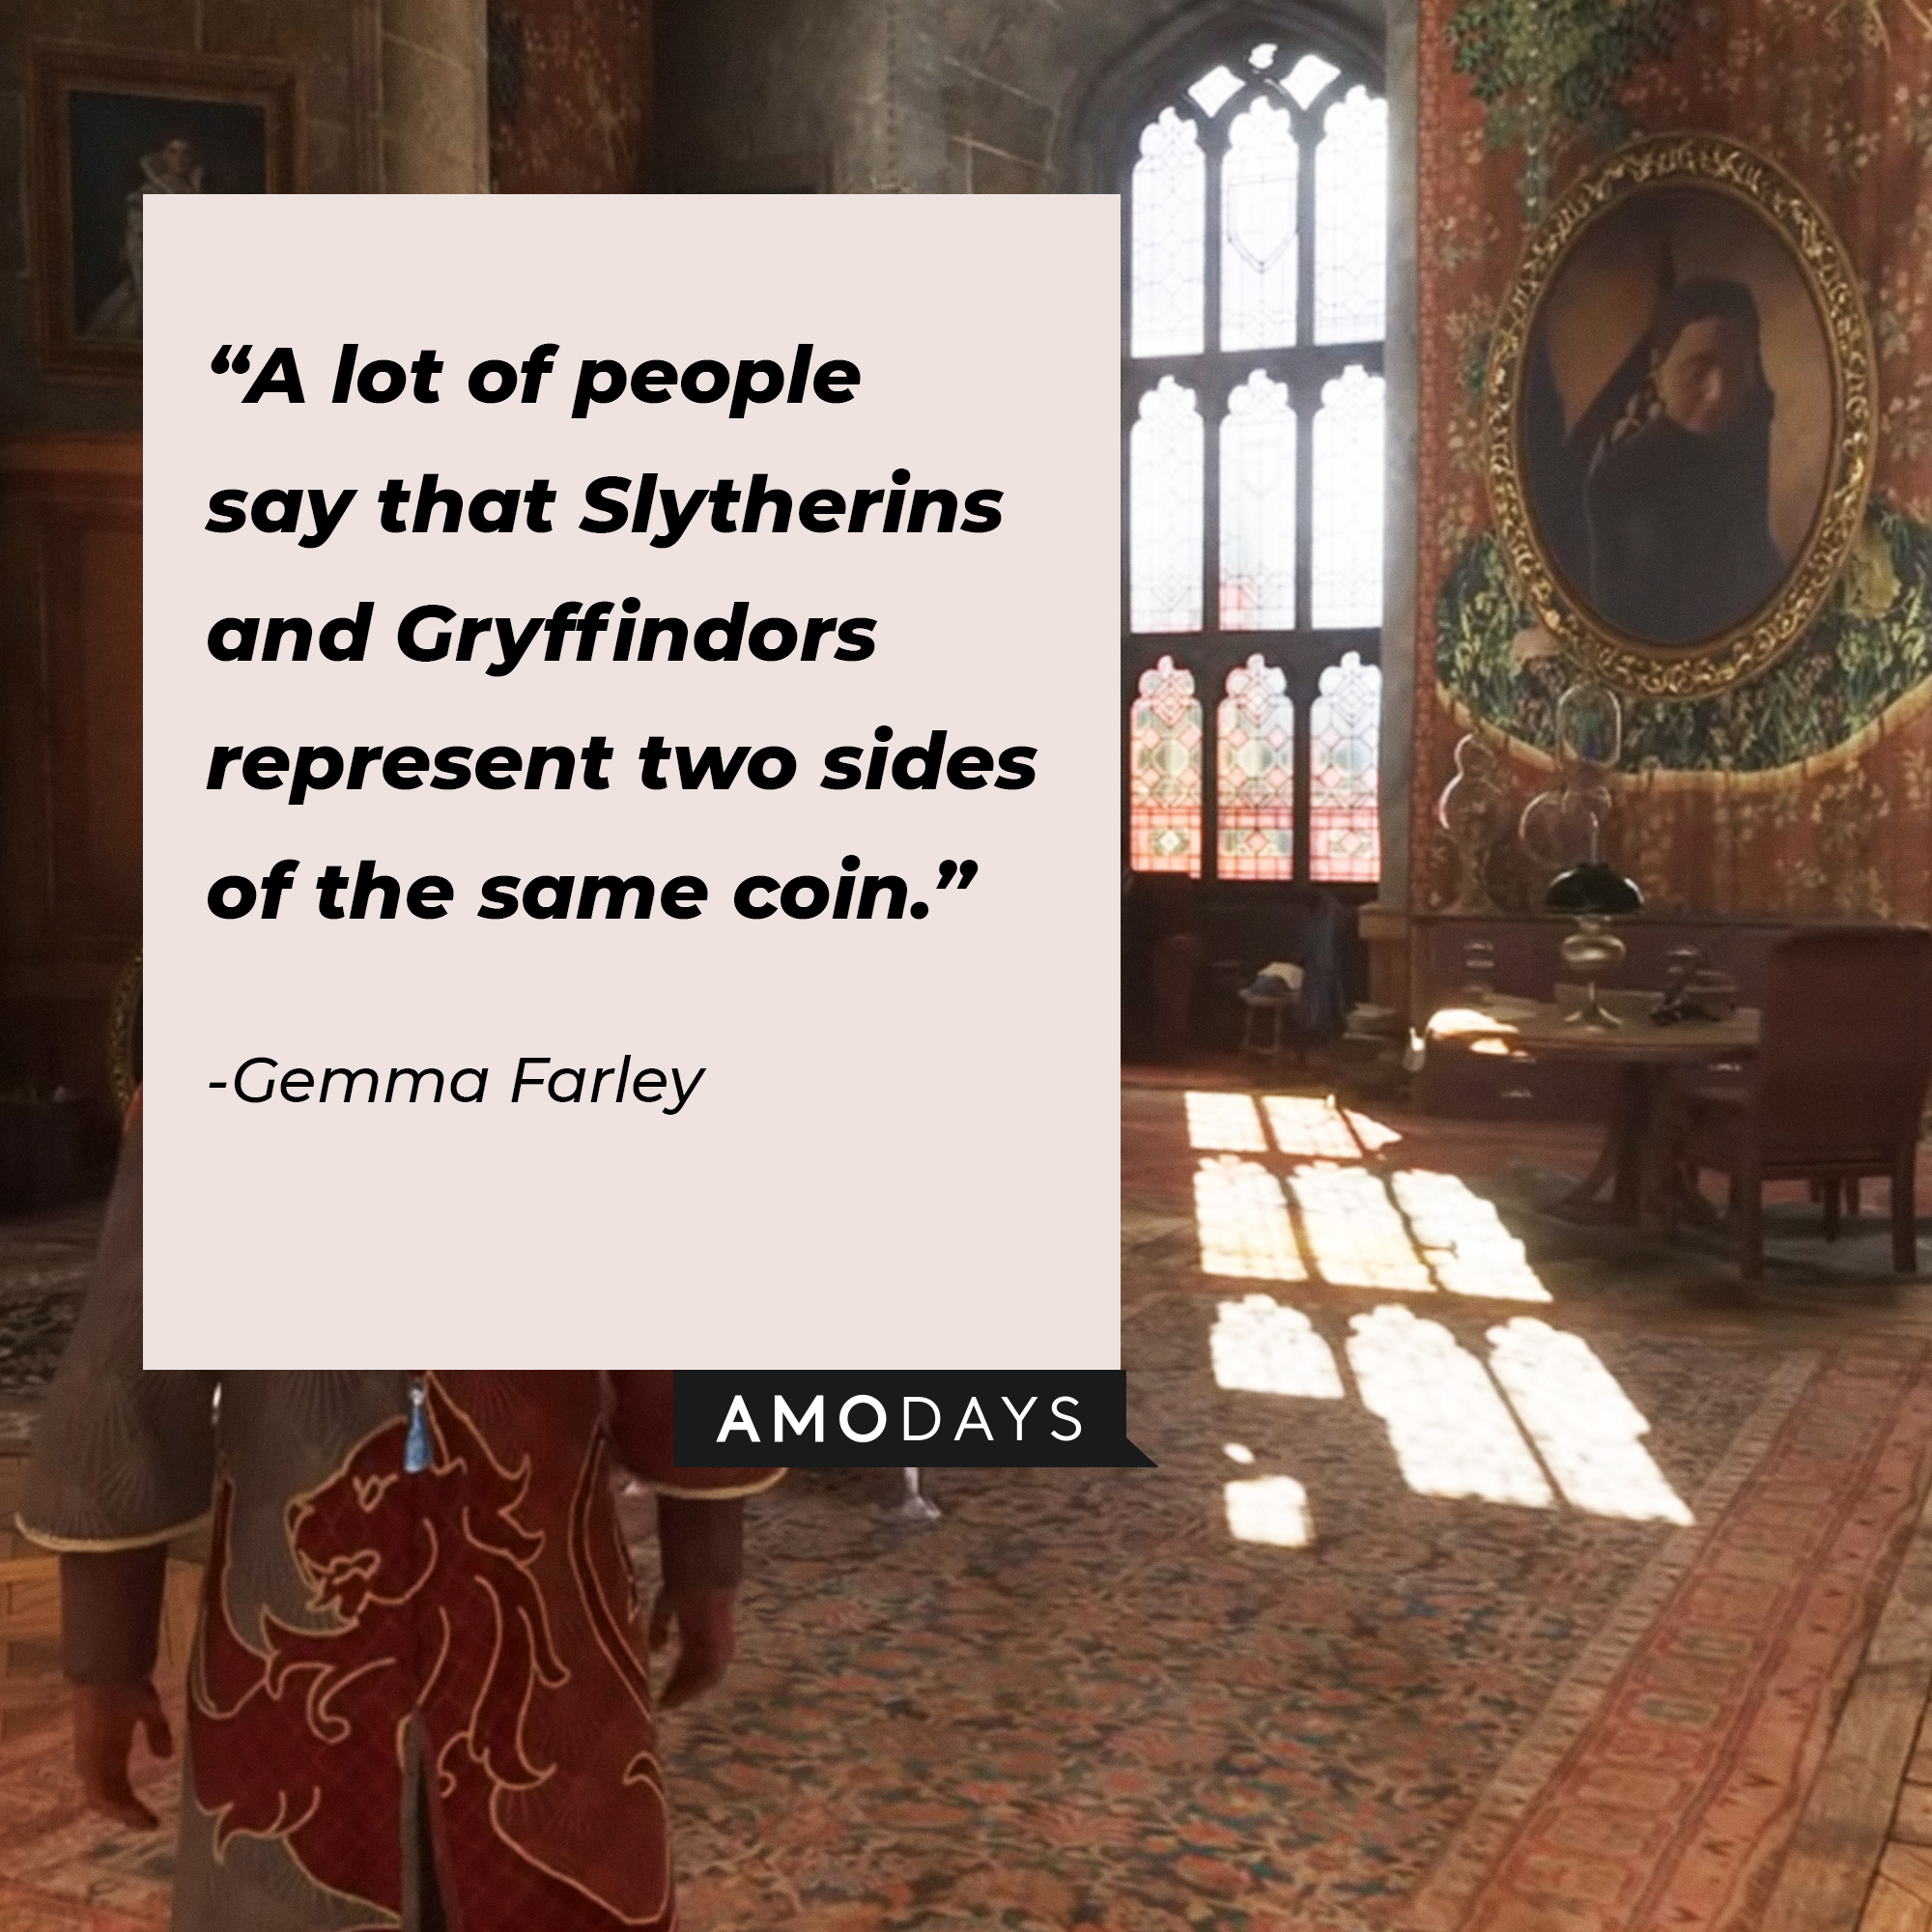 Gemma Farley's quote: "A lot of people say that Slytherins and Gryffindors represent two sides of the same coin." | Source: Youtube.com/HogwartsLegacy